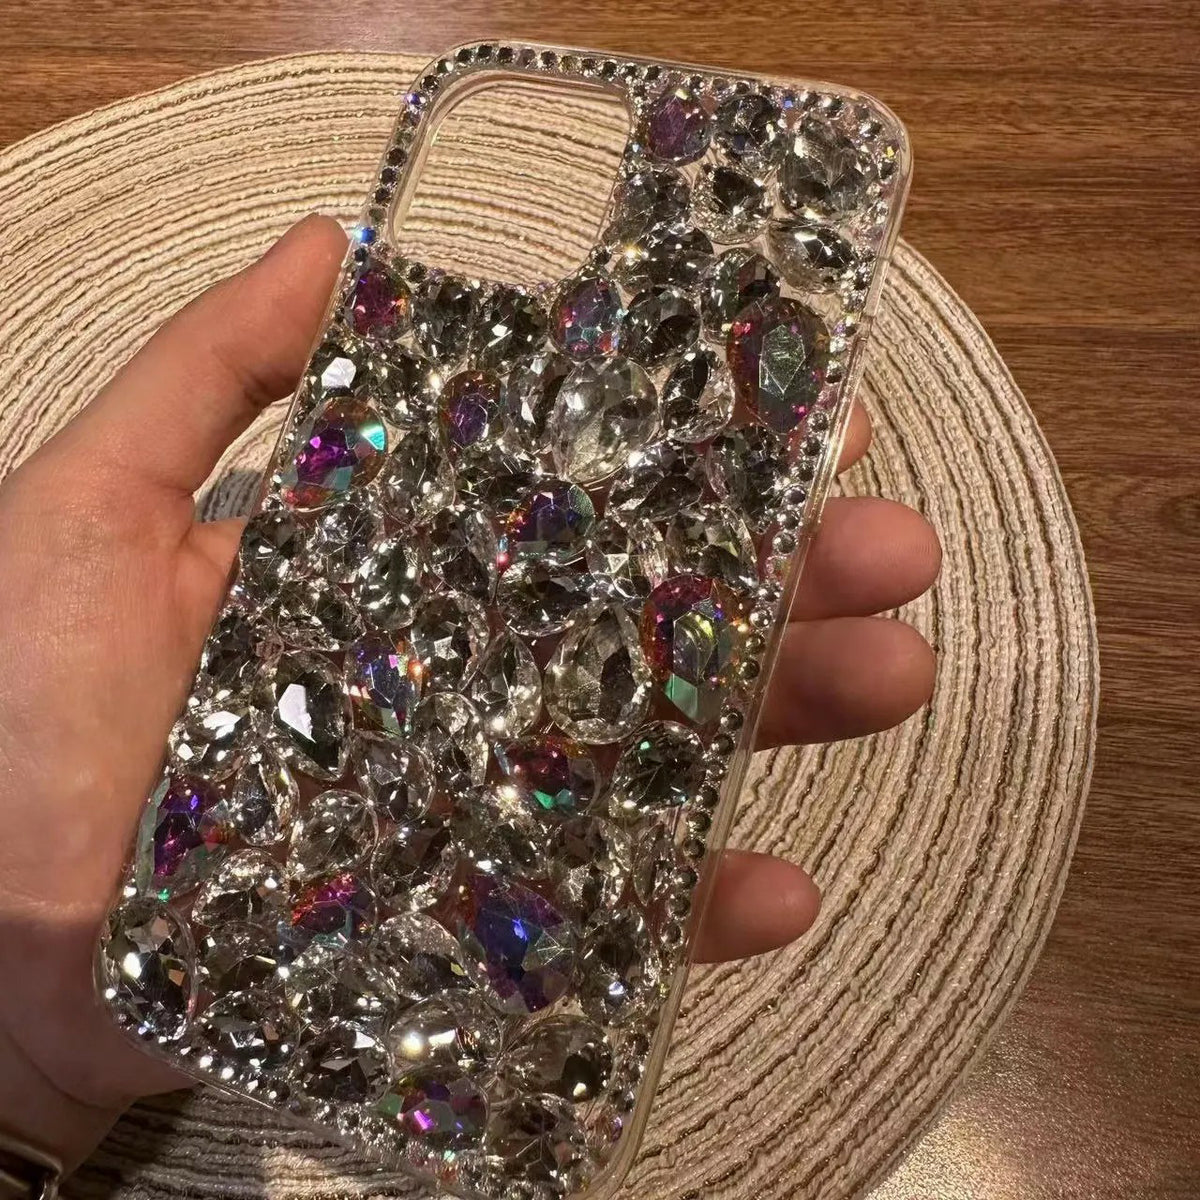 Women Fashion Transparent Lens Camera Glitter Diamond Soft Phone Case For Iphone Cover Clear For Iphone 11 12 13 14 15